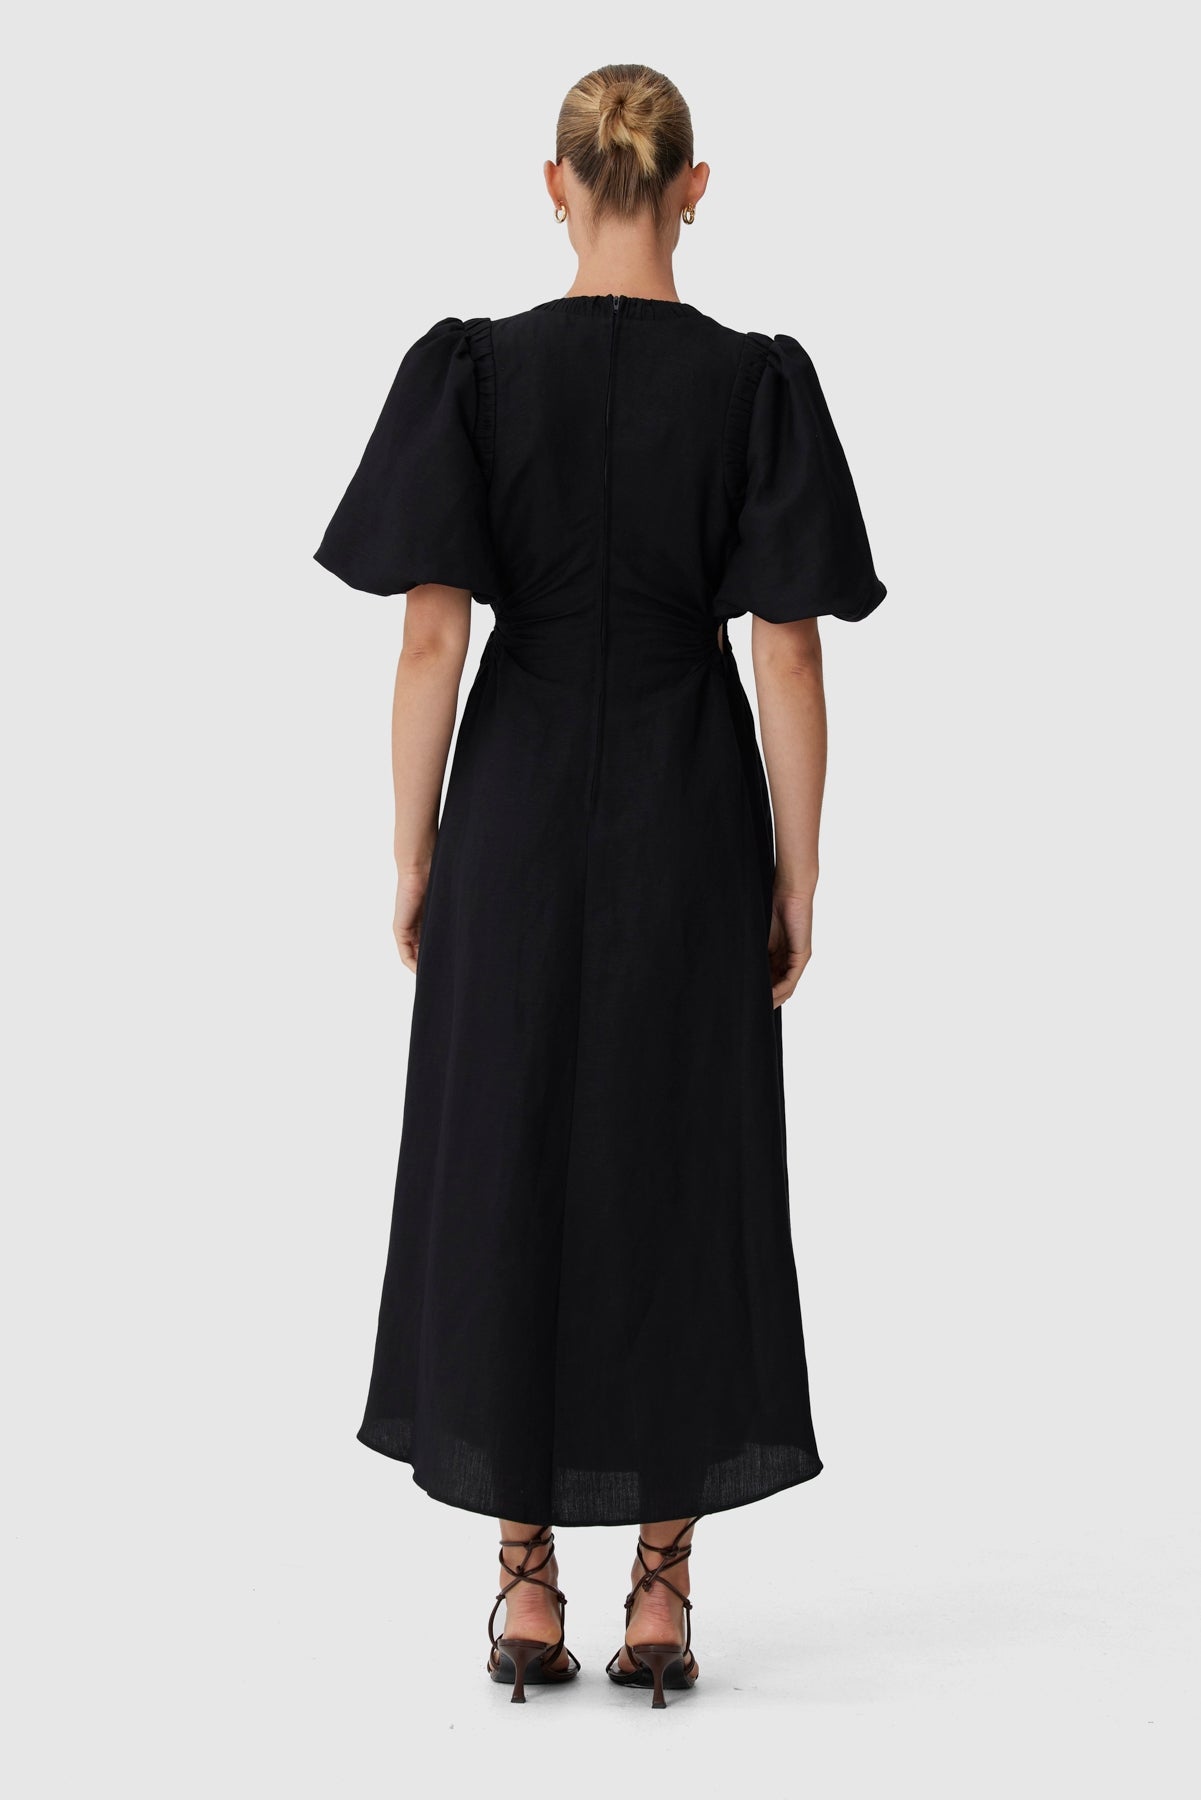 C/MEO Collective - Now And Forever Dress - Black – Fashion Bunker